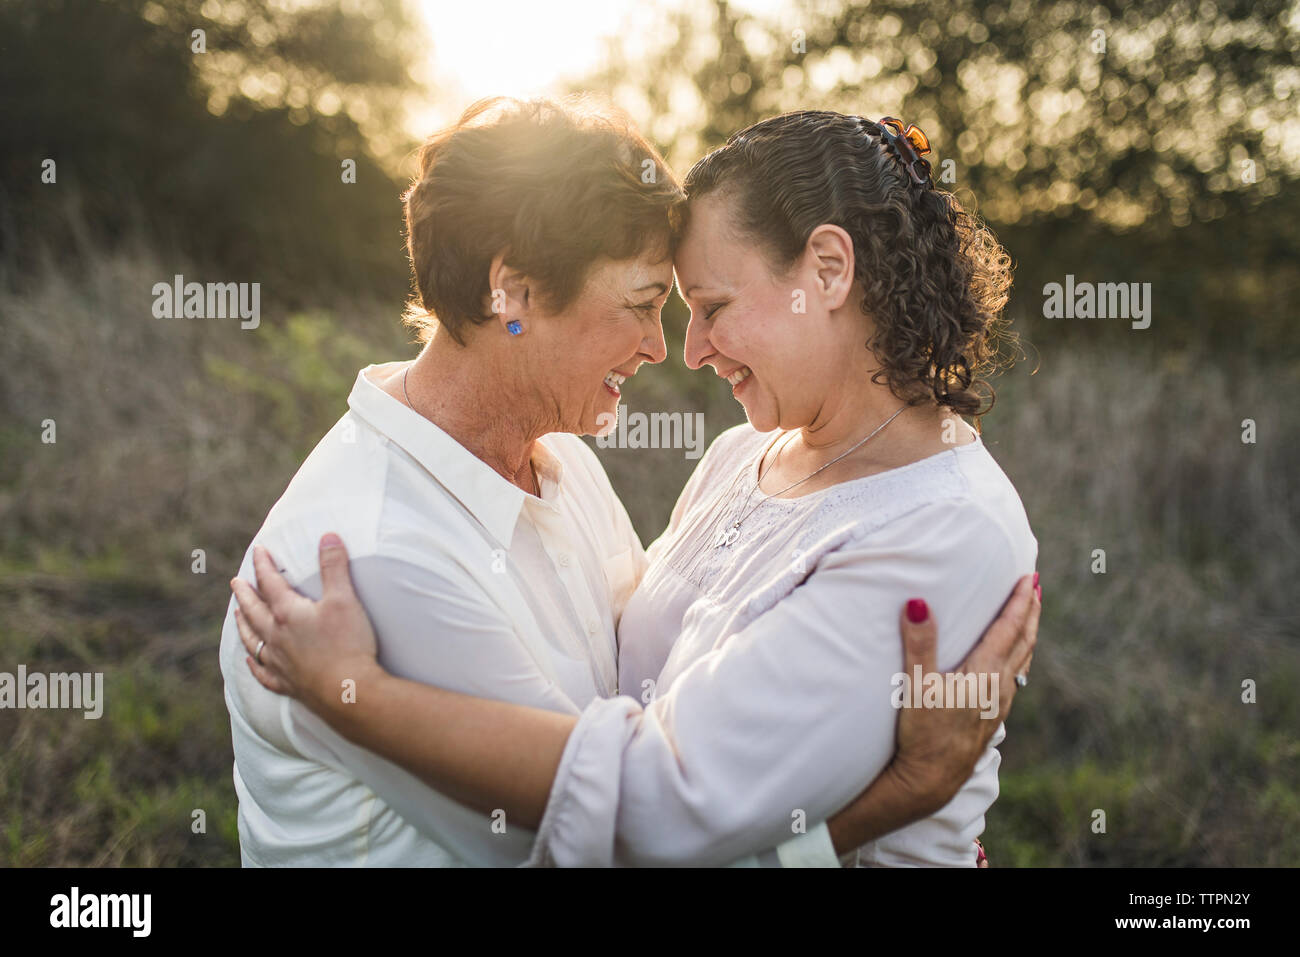 Close up portrait of adult mother and daughter embracing and smiling Banque D'Images